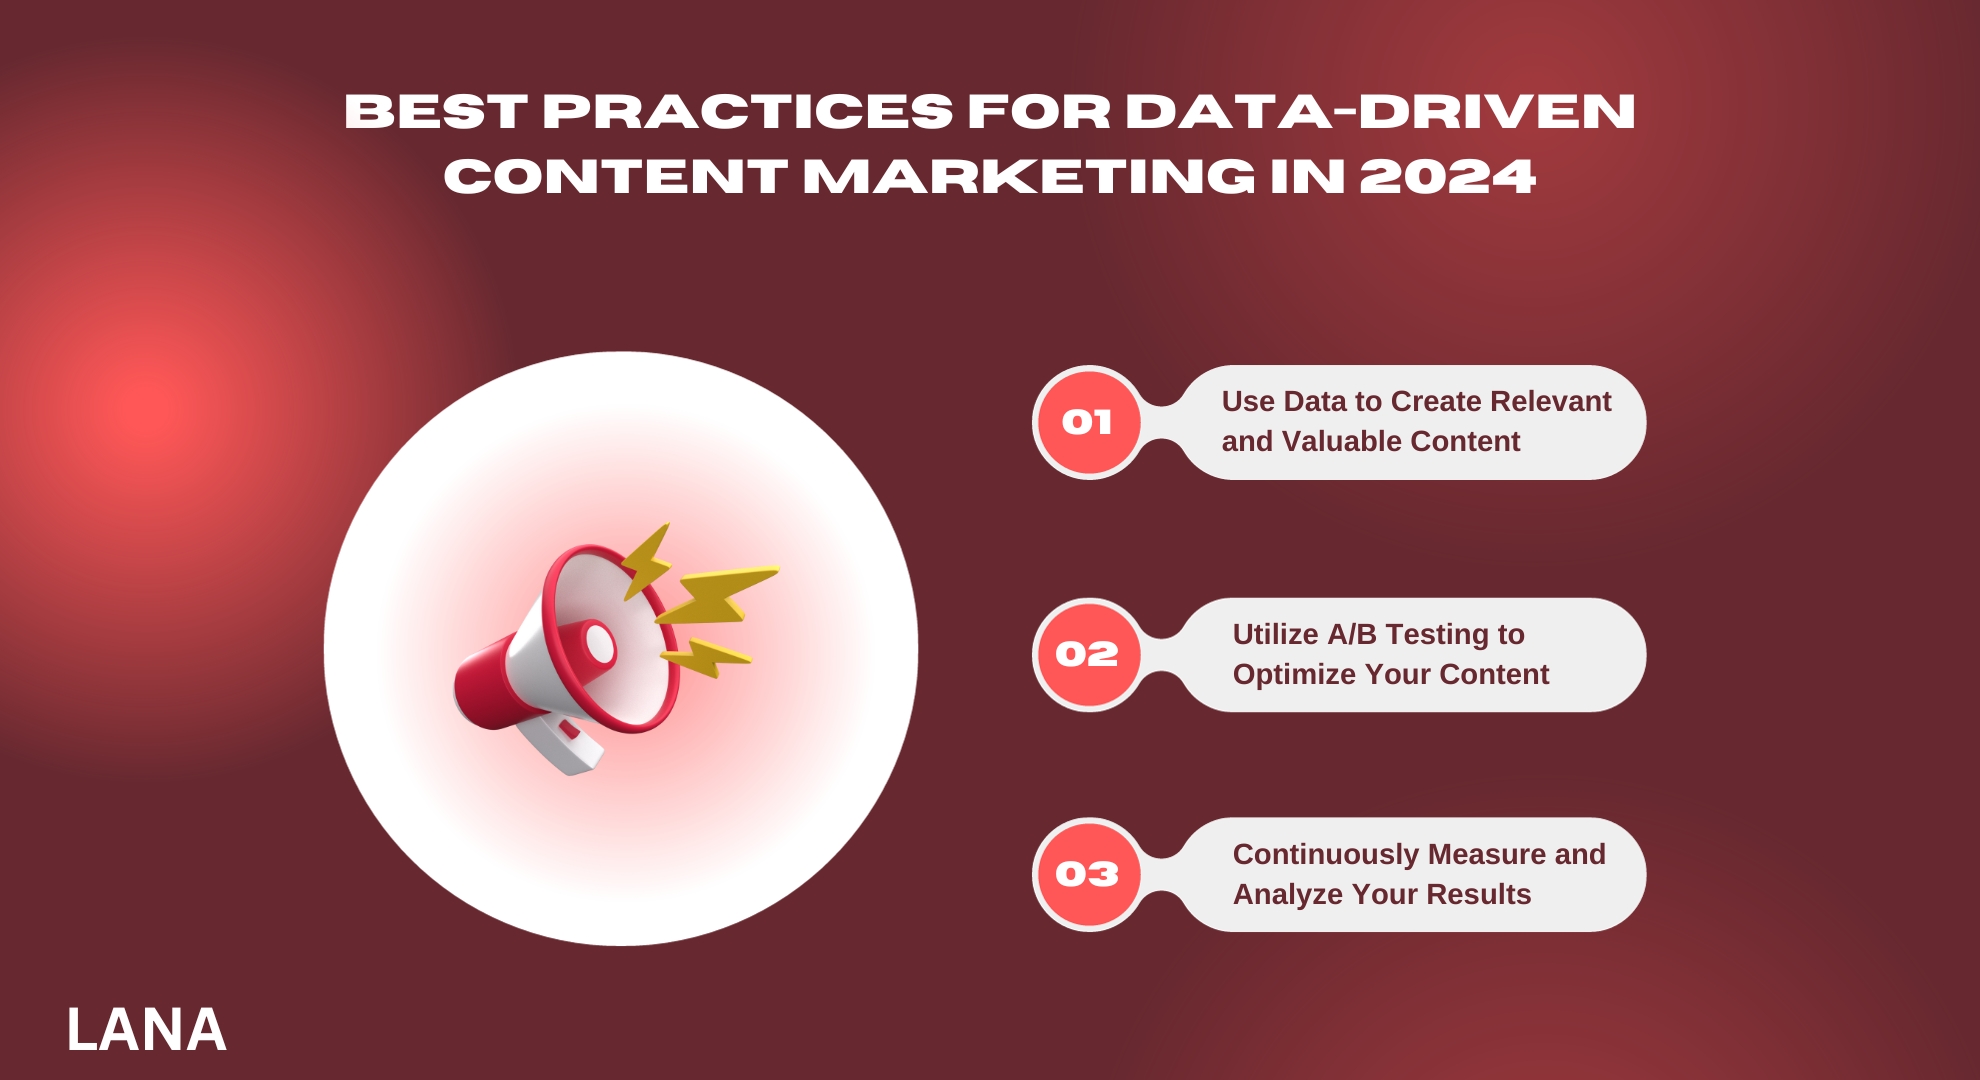 Best Practices for Data-Driven Content Marketing in 2024